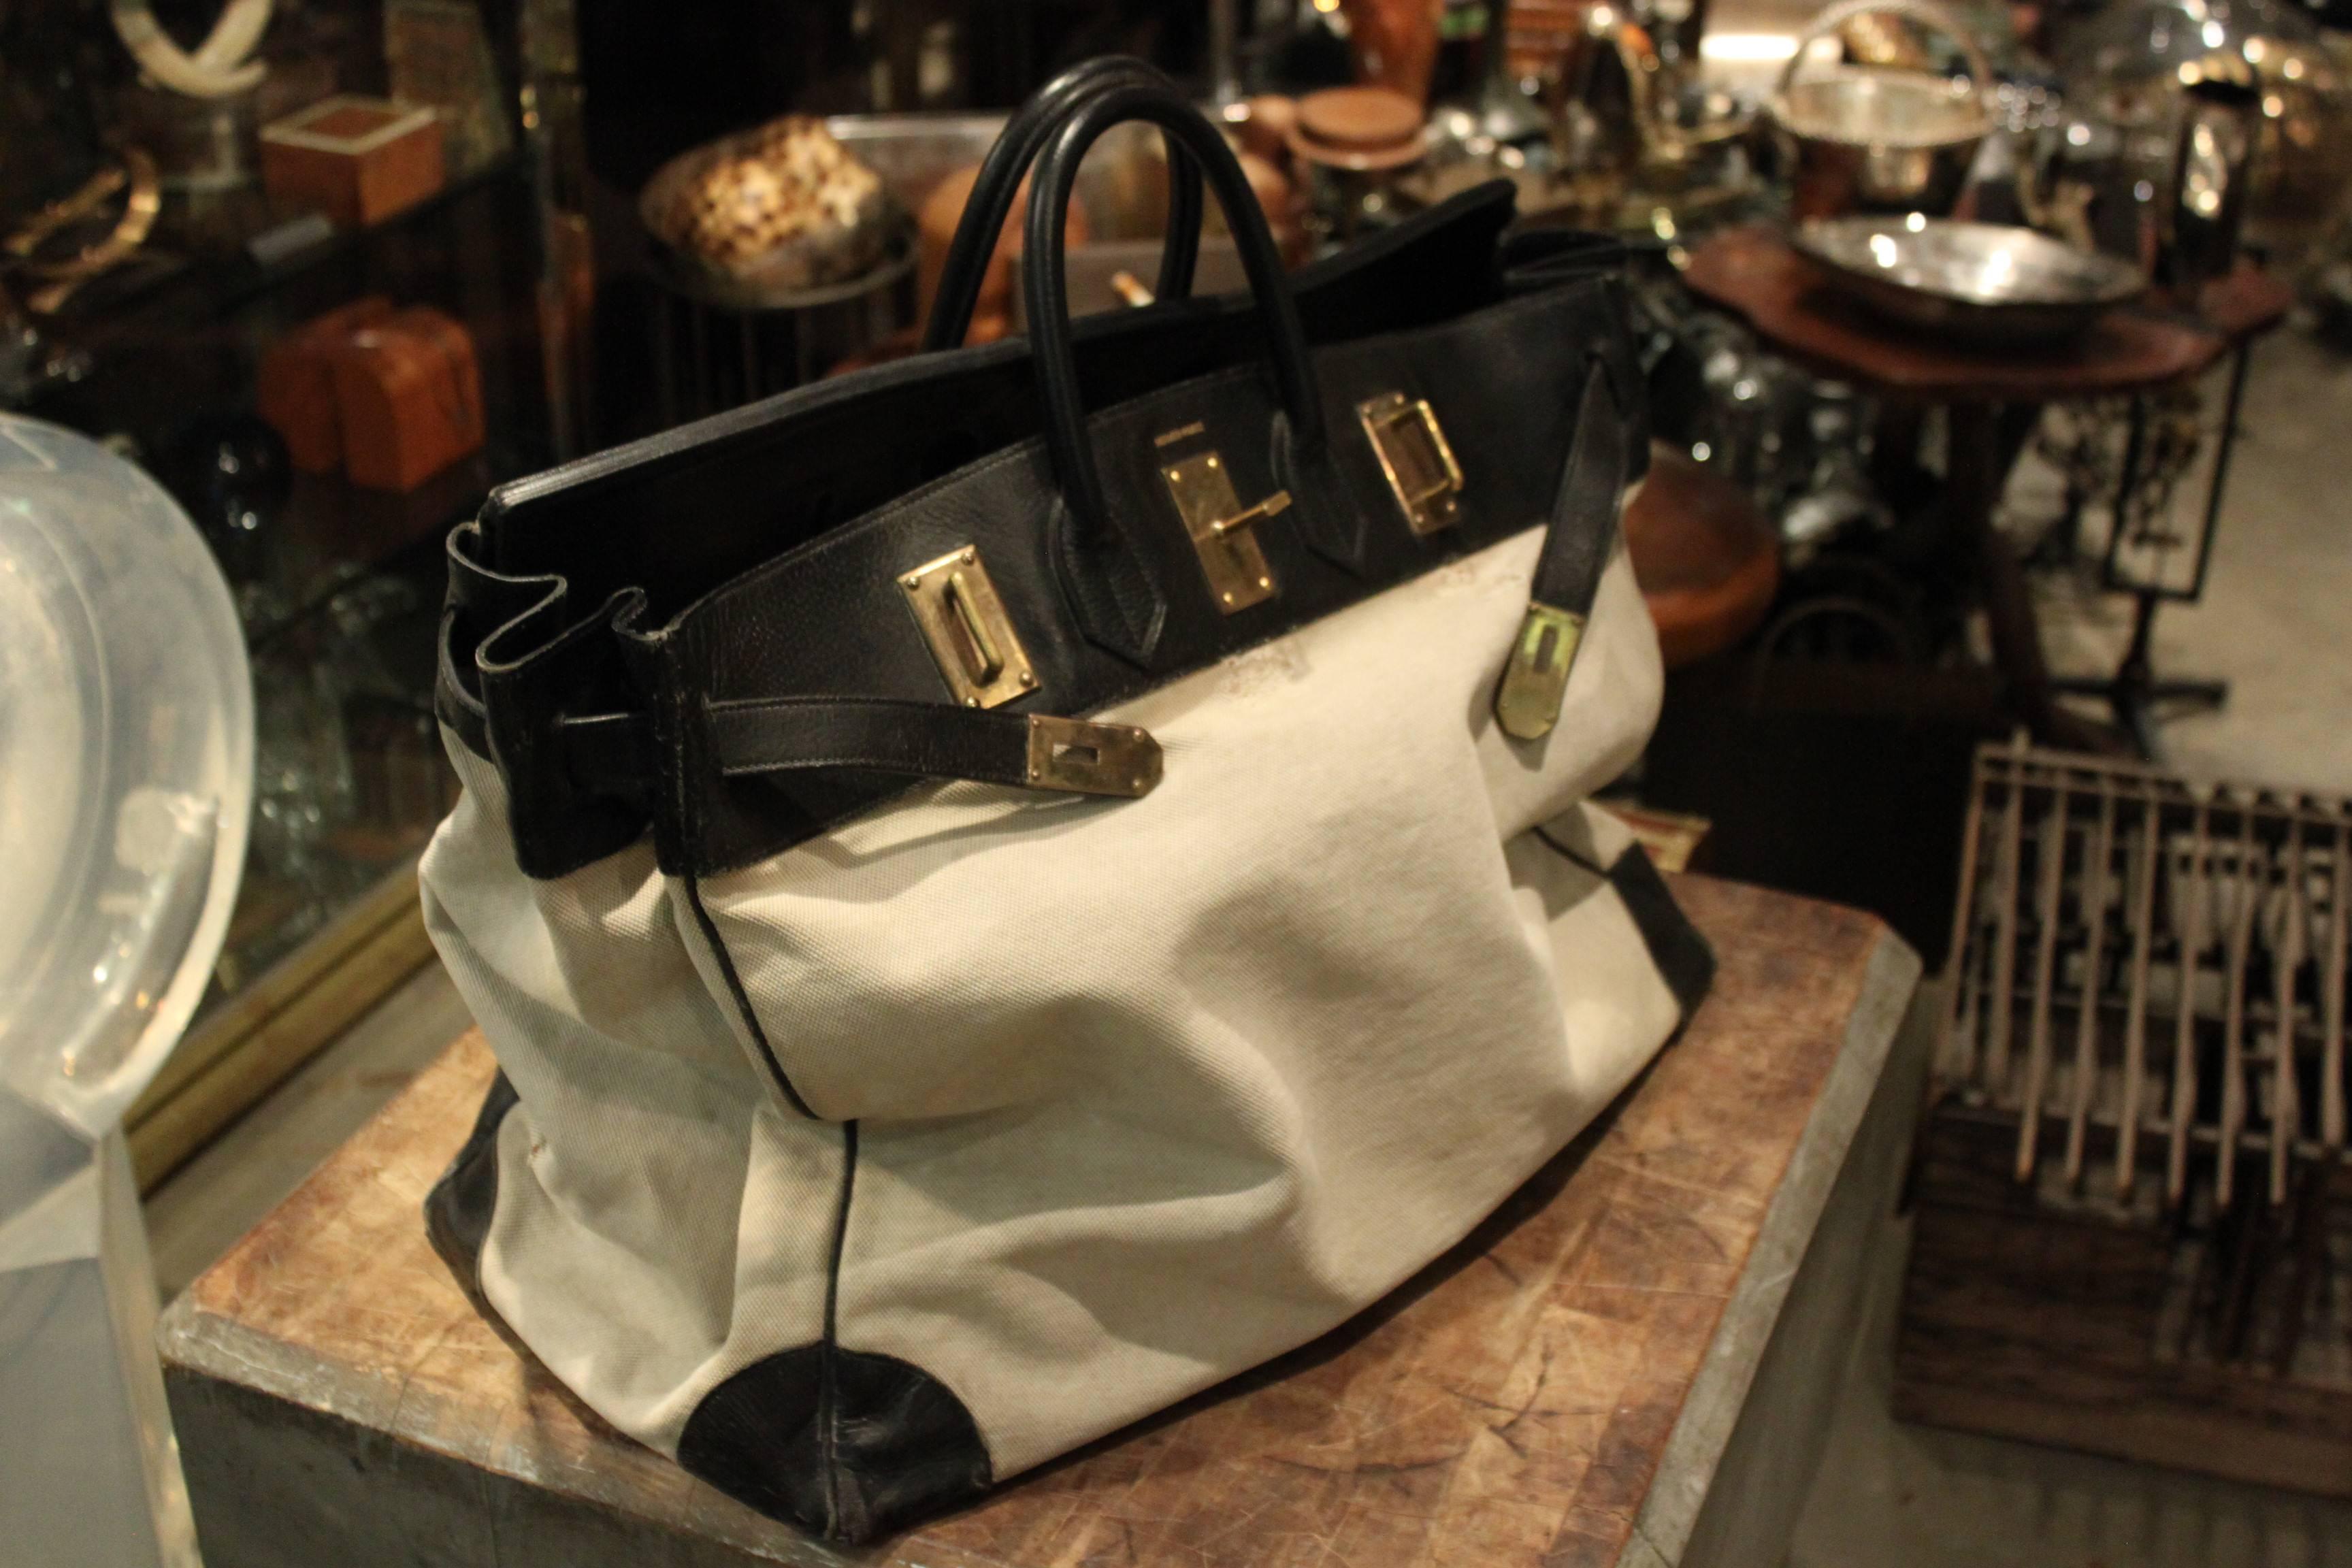 Amazing Hermes 55 cm HAC bag. This bag has perfect wear. It is structurally very strong. Its black leather and white canvas. A great vintage example.